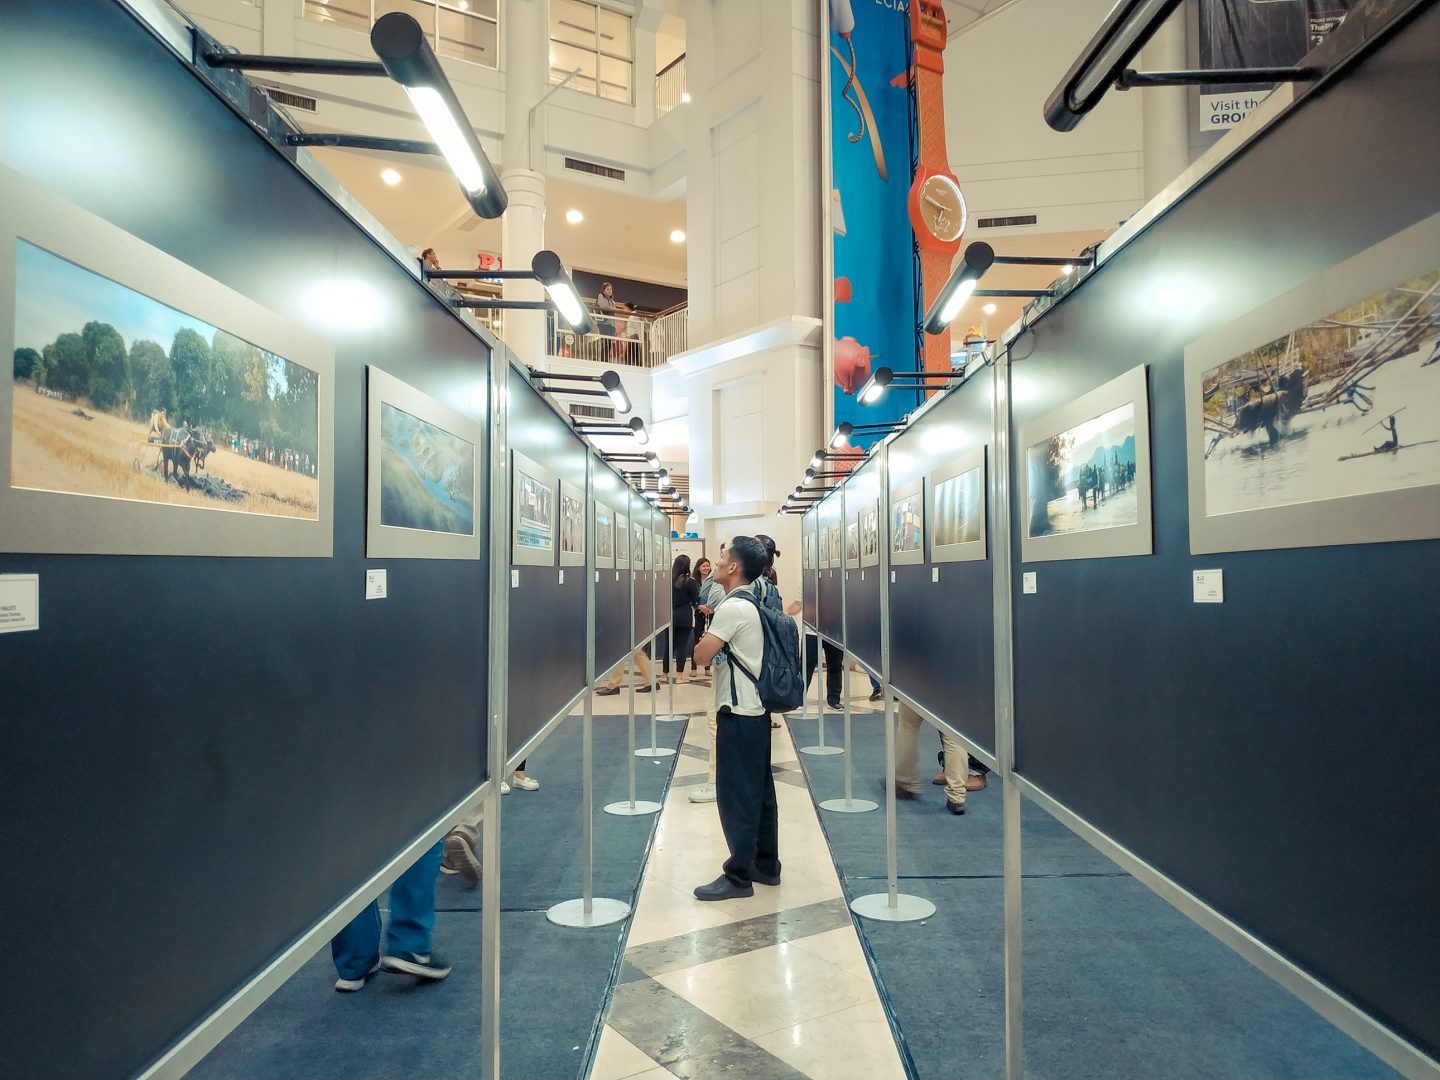 Photoworld Asia 2019: Changing the World through Photography